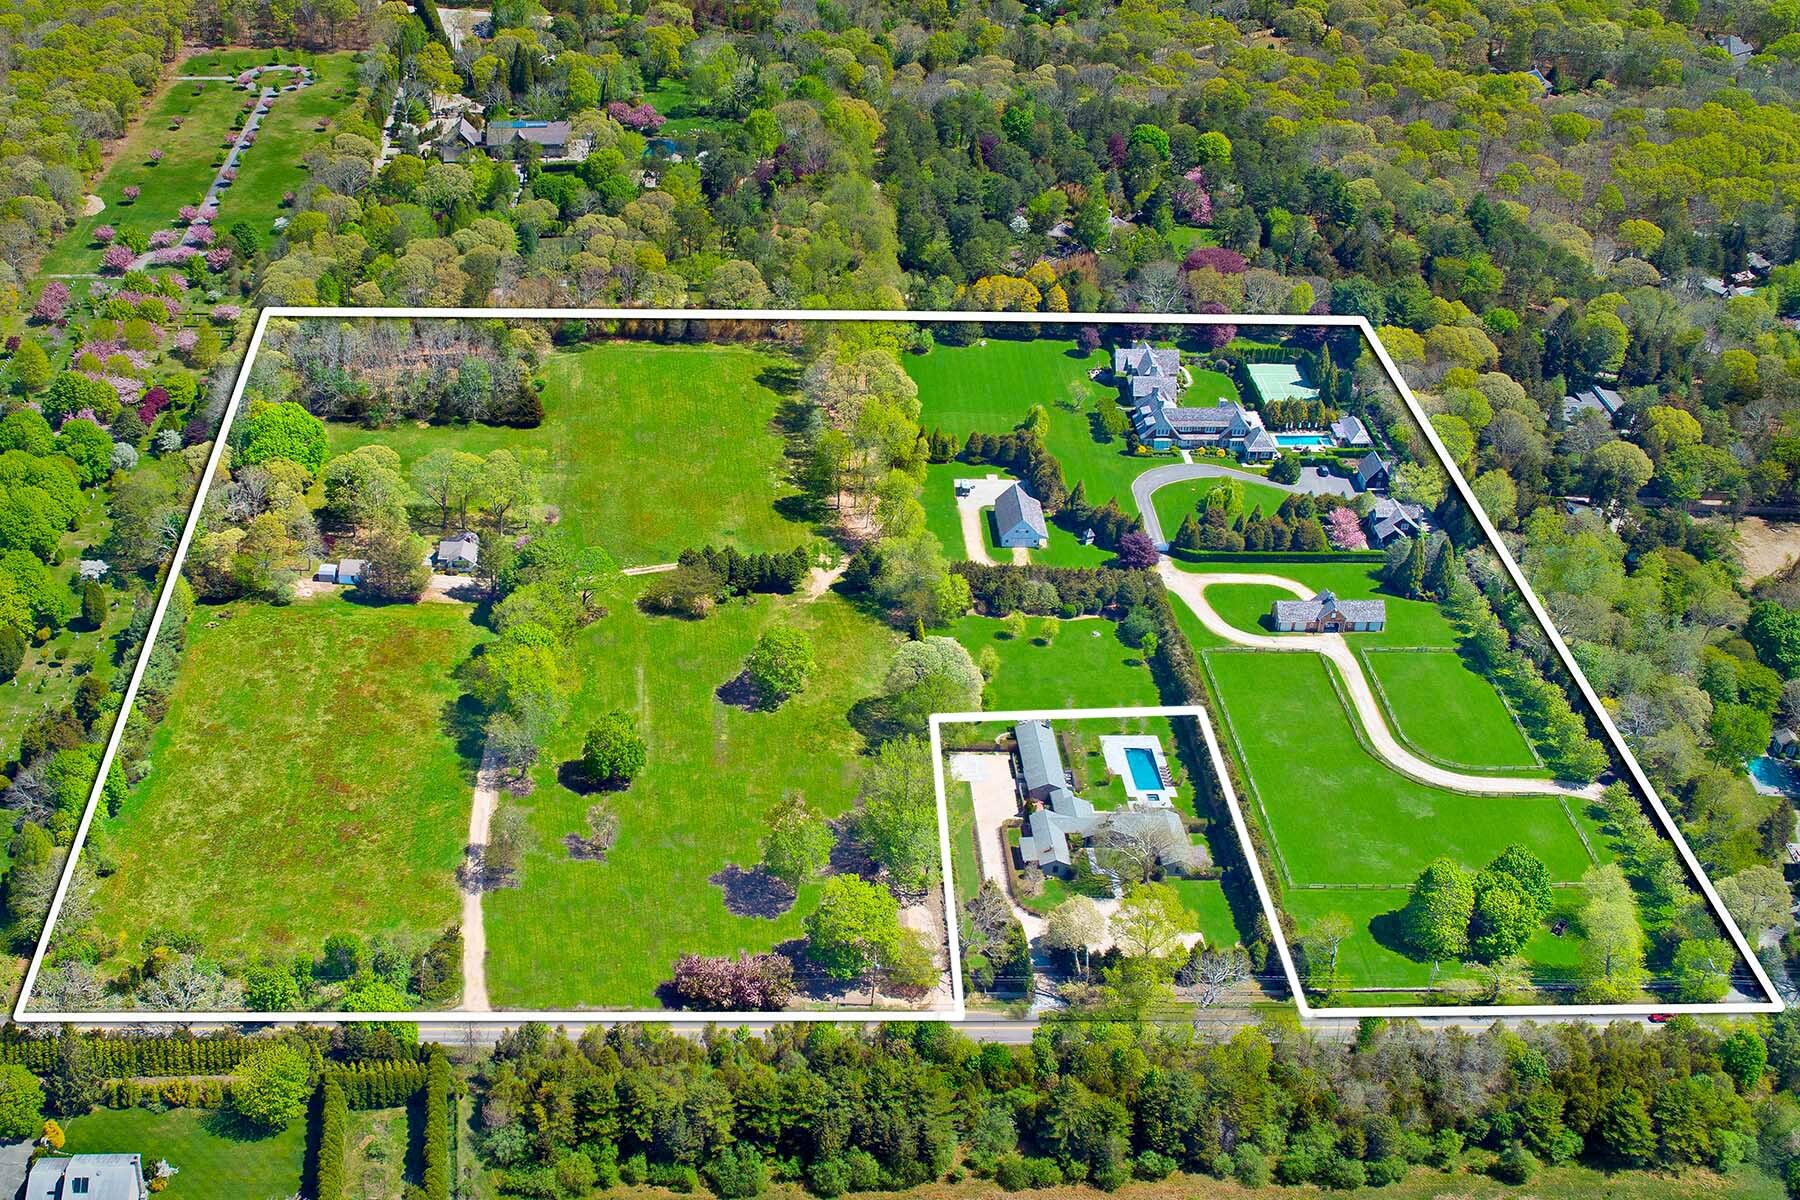 The Cedar Street 21.8-acre compound in East Hampton recently sold for 22.7 million. COURTESY SOTHEBY'S INTERNATIONAL REALTY